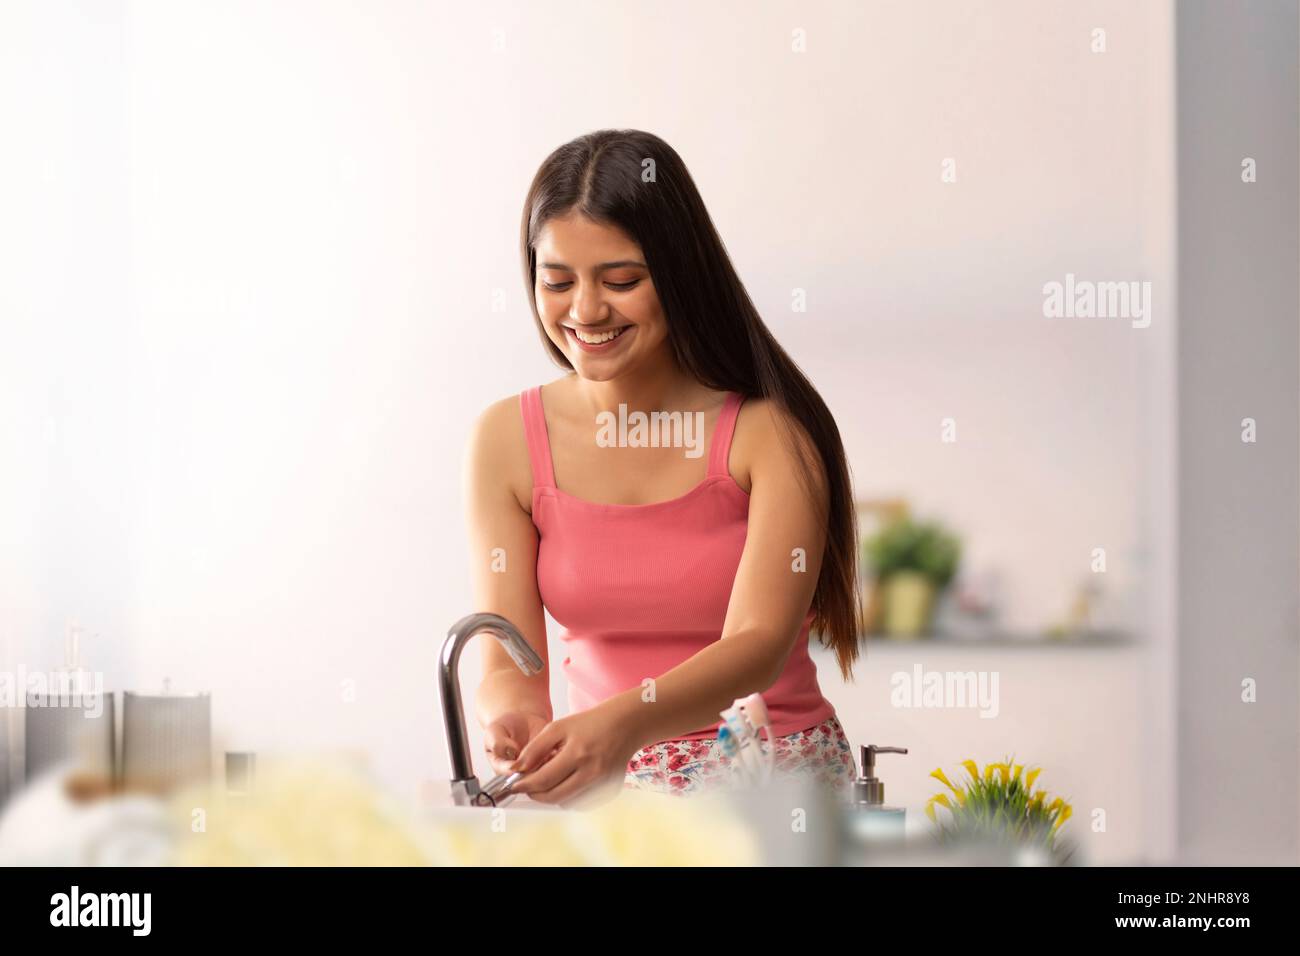 Cheerful young woman washing her hands in bathroom Stock Photo